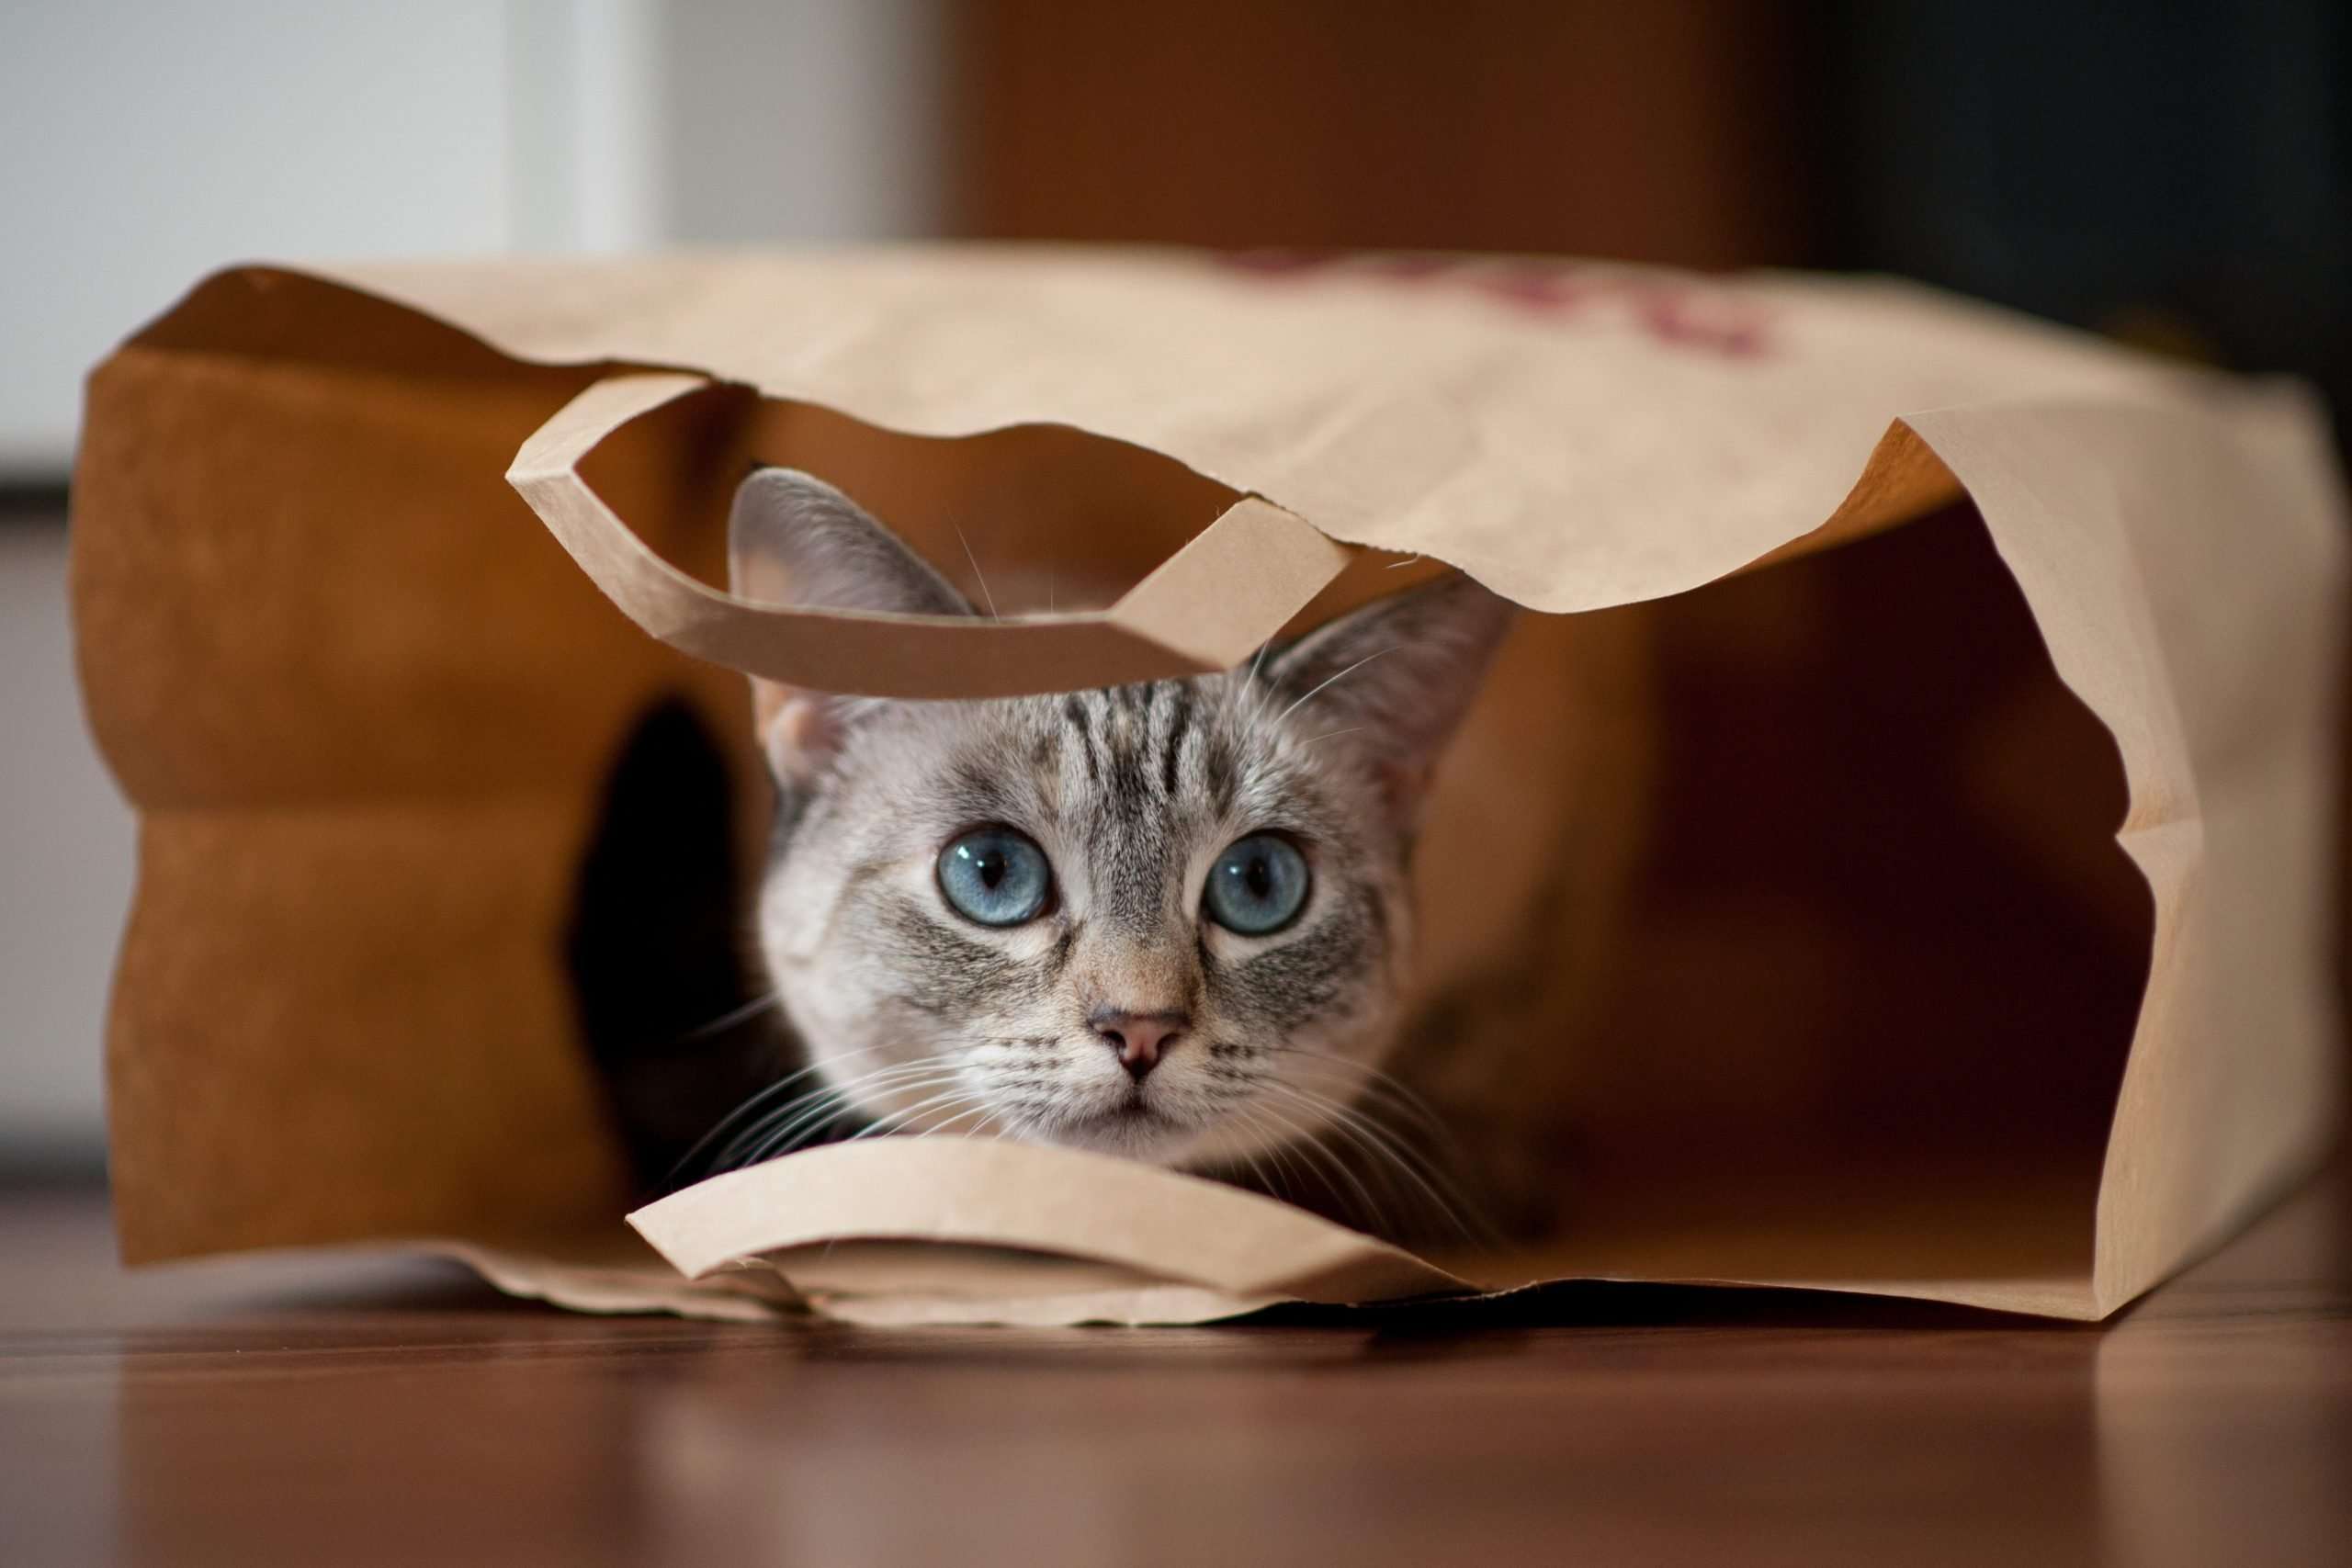 Why Do We Say " Let the Cat Out of the Bag" ?